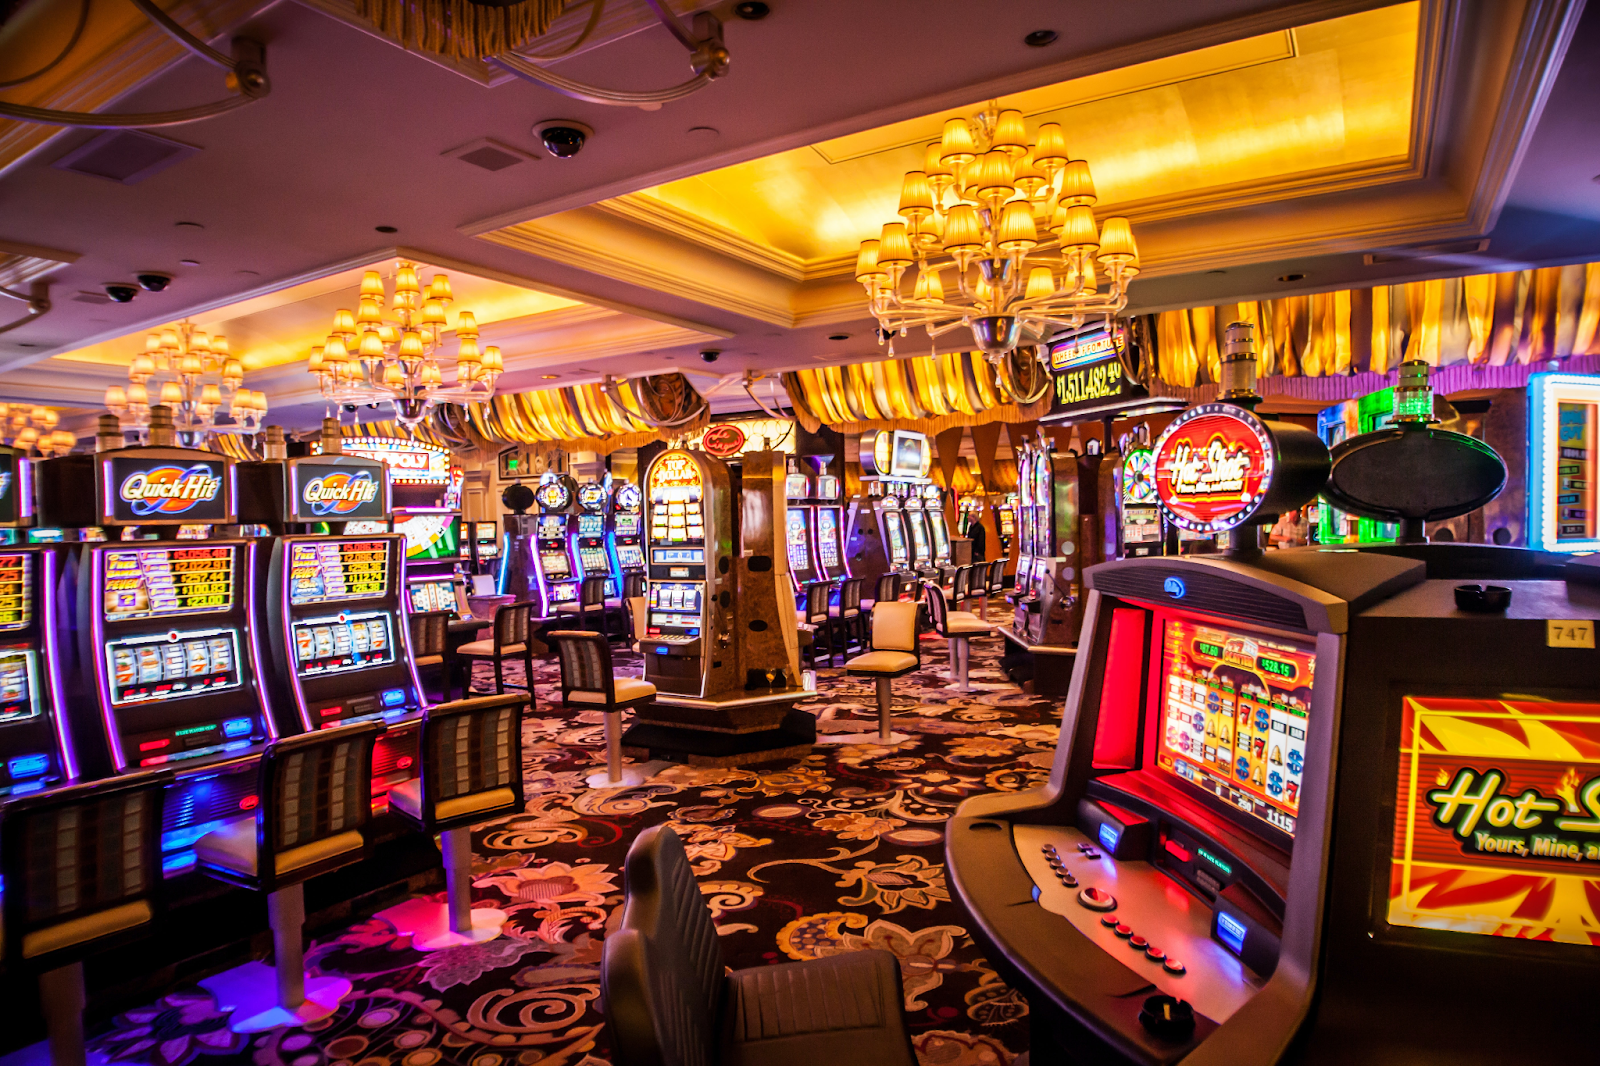 A bustling scene with multiple vibrant slot machines lined up in rows